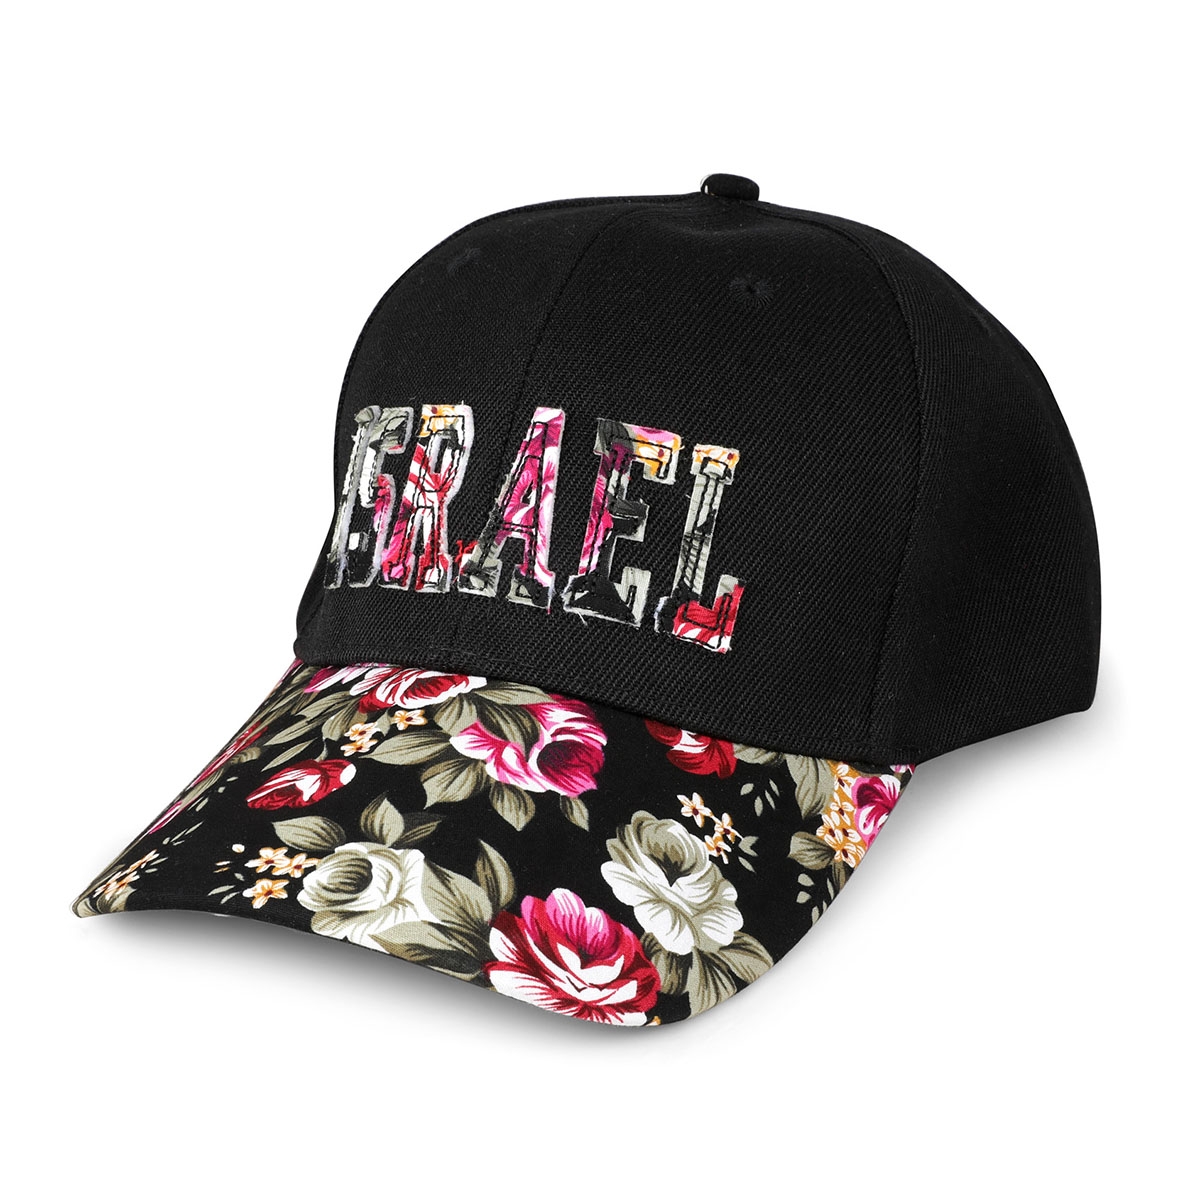 Israel Cap with Floral Design - 1